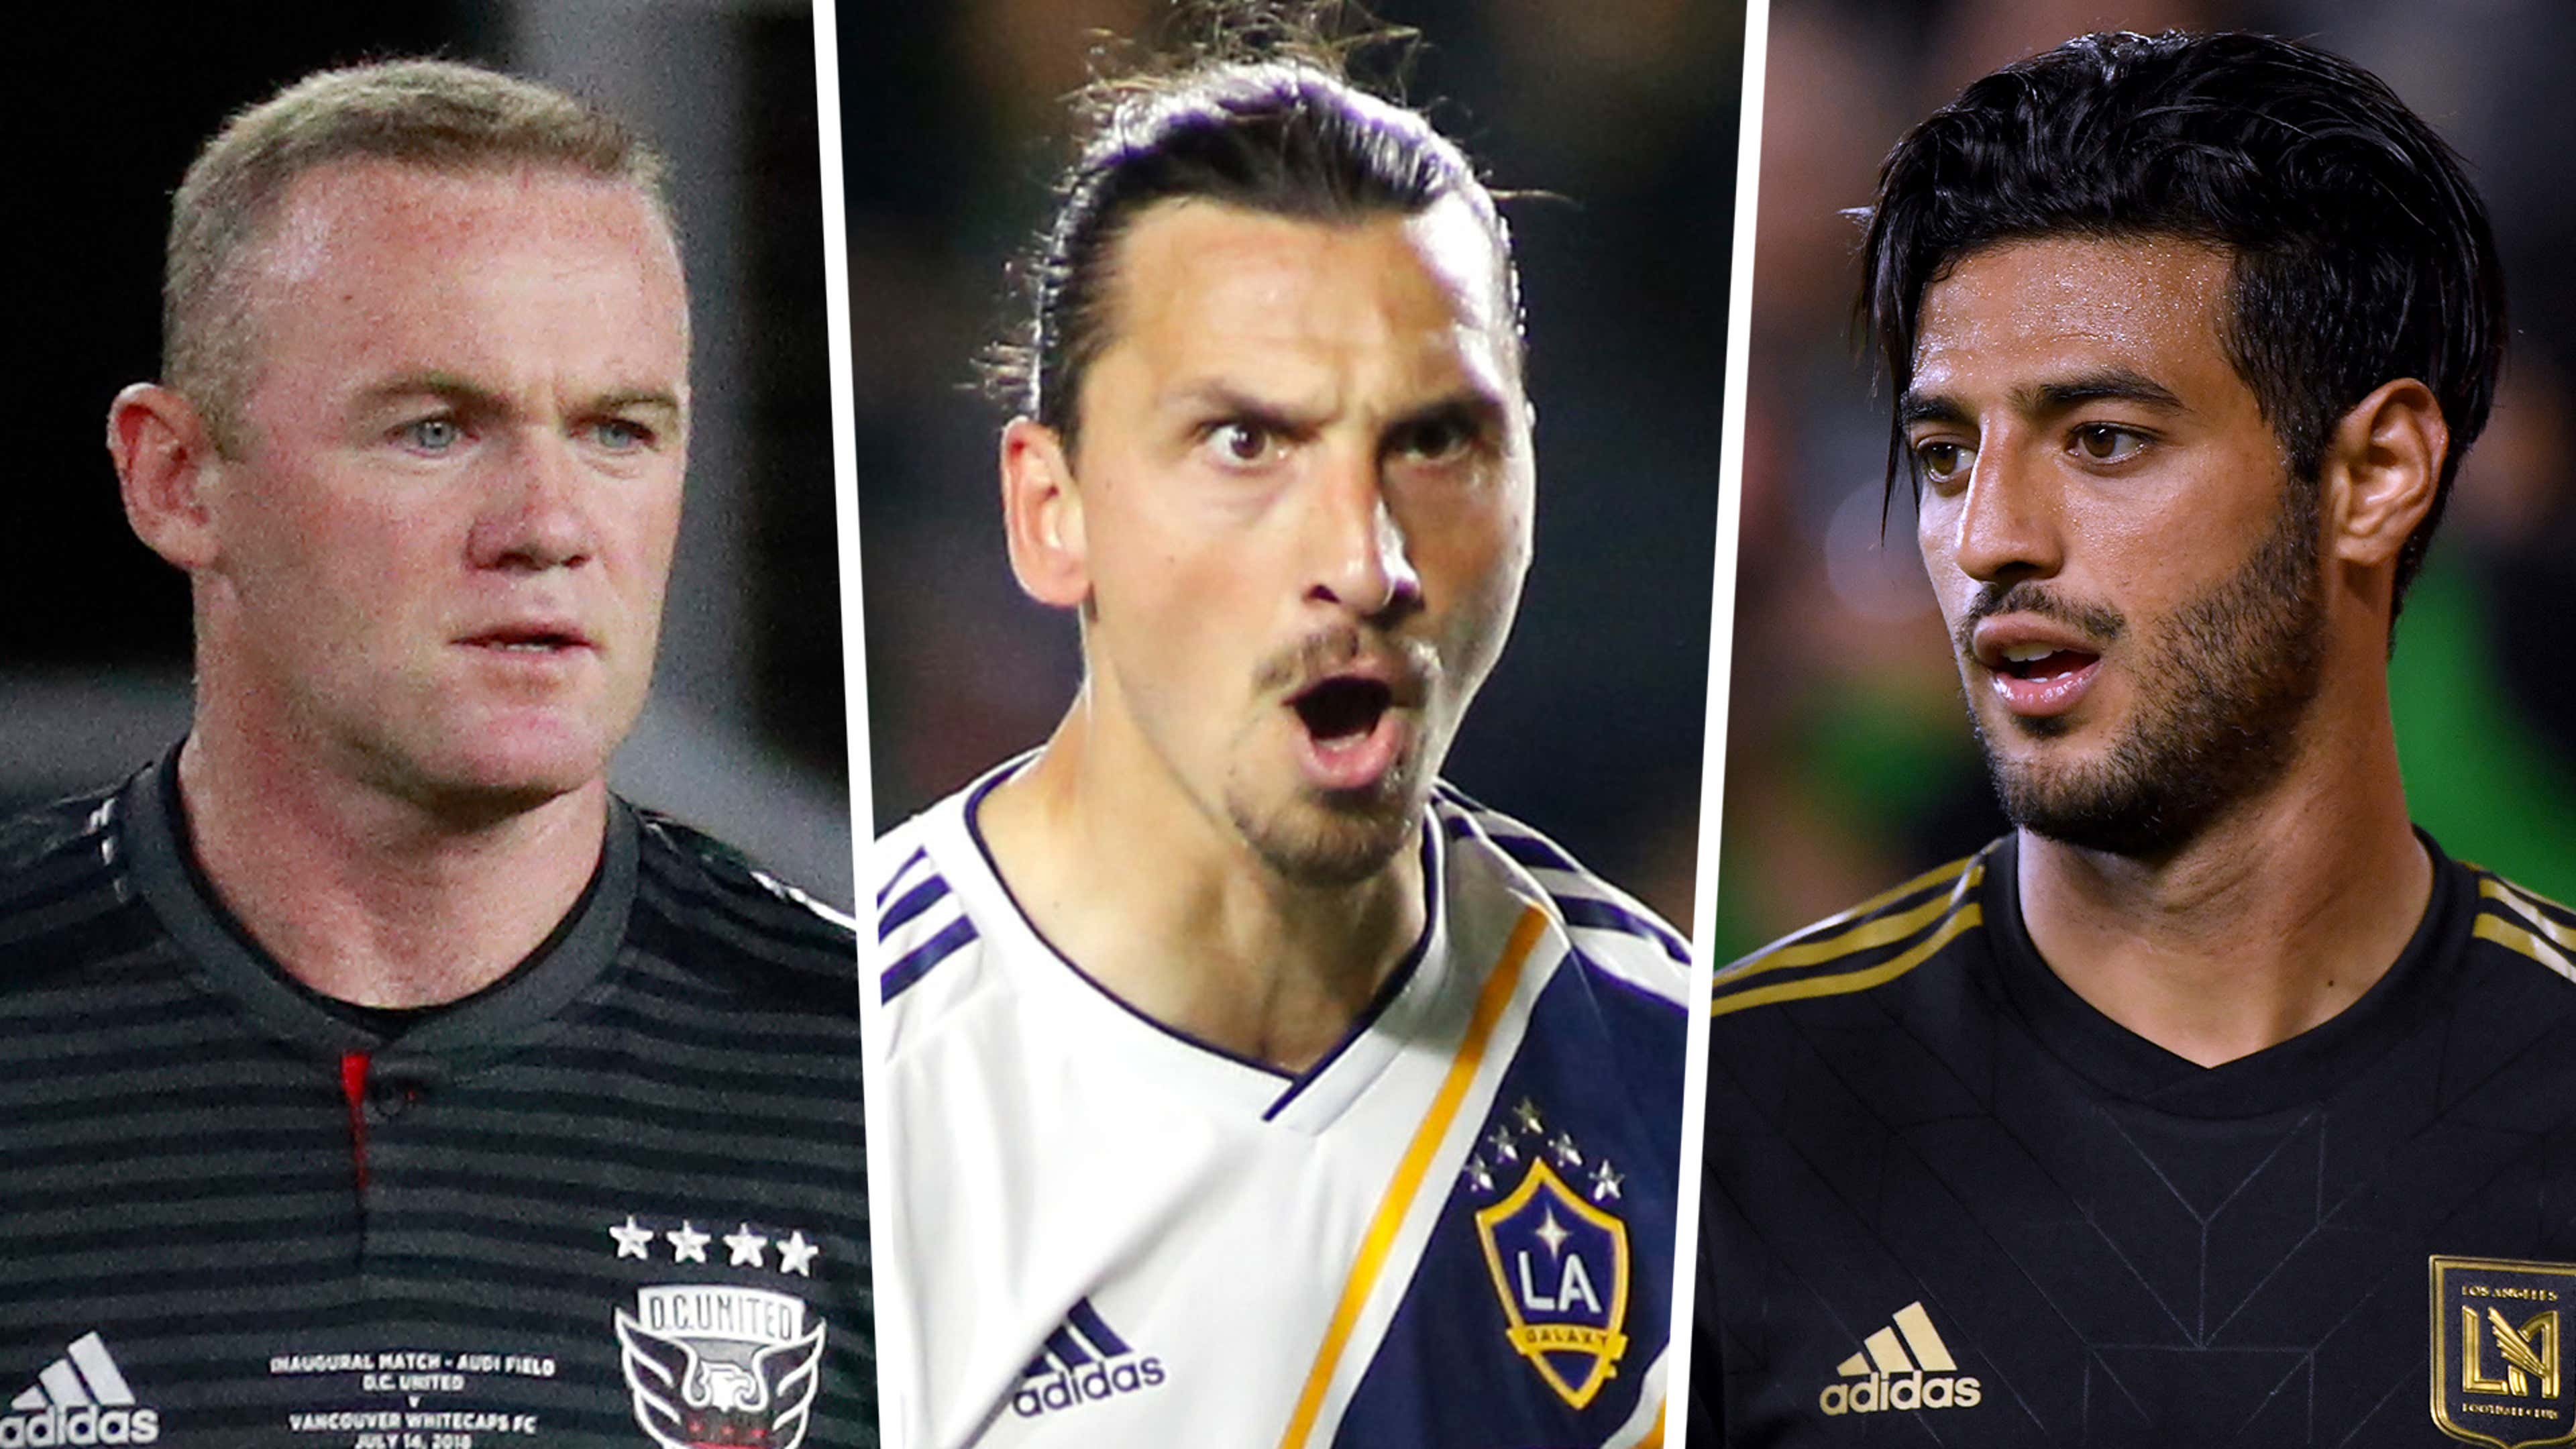 Zlatan Ibrahimovic is the highest-paid player in Major League